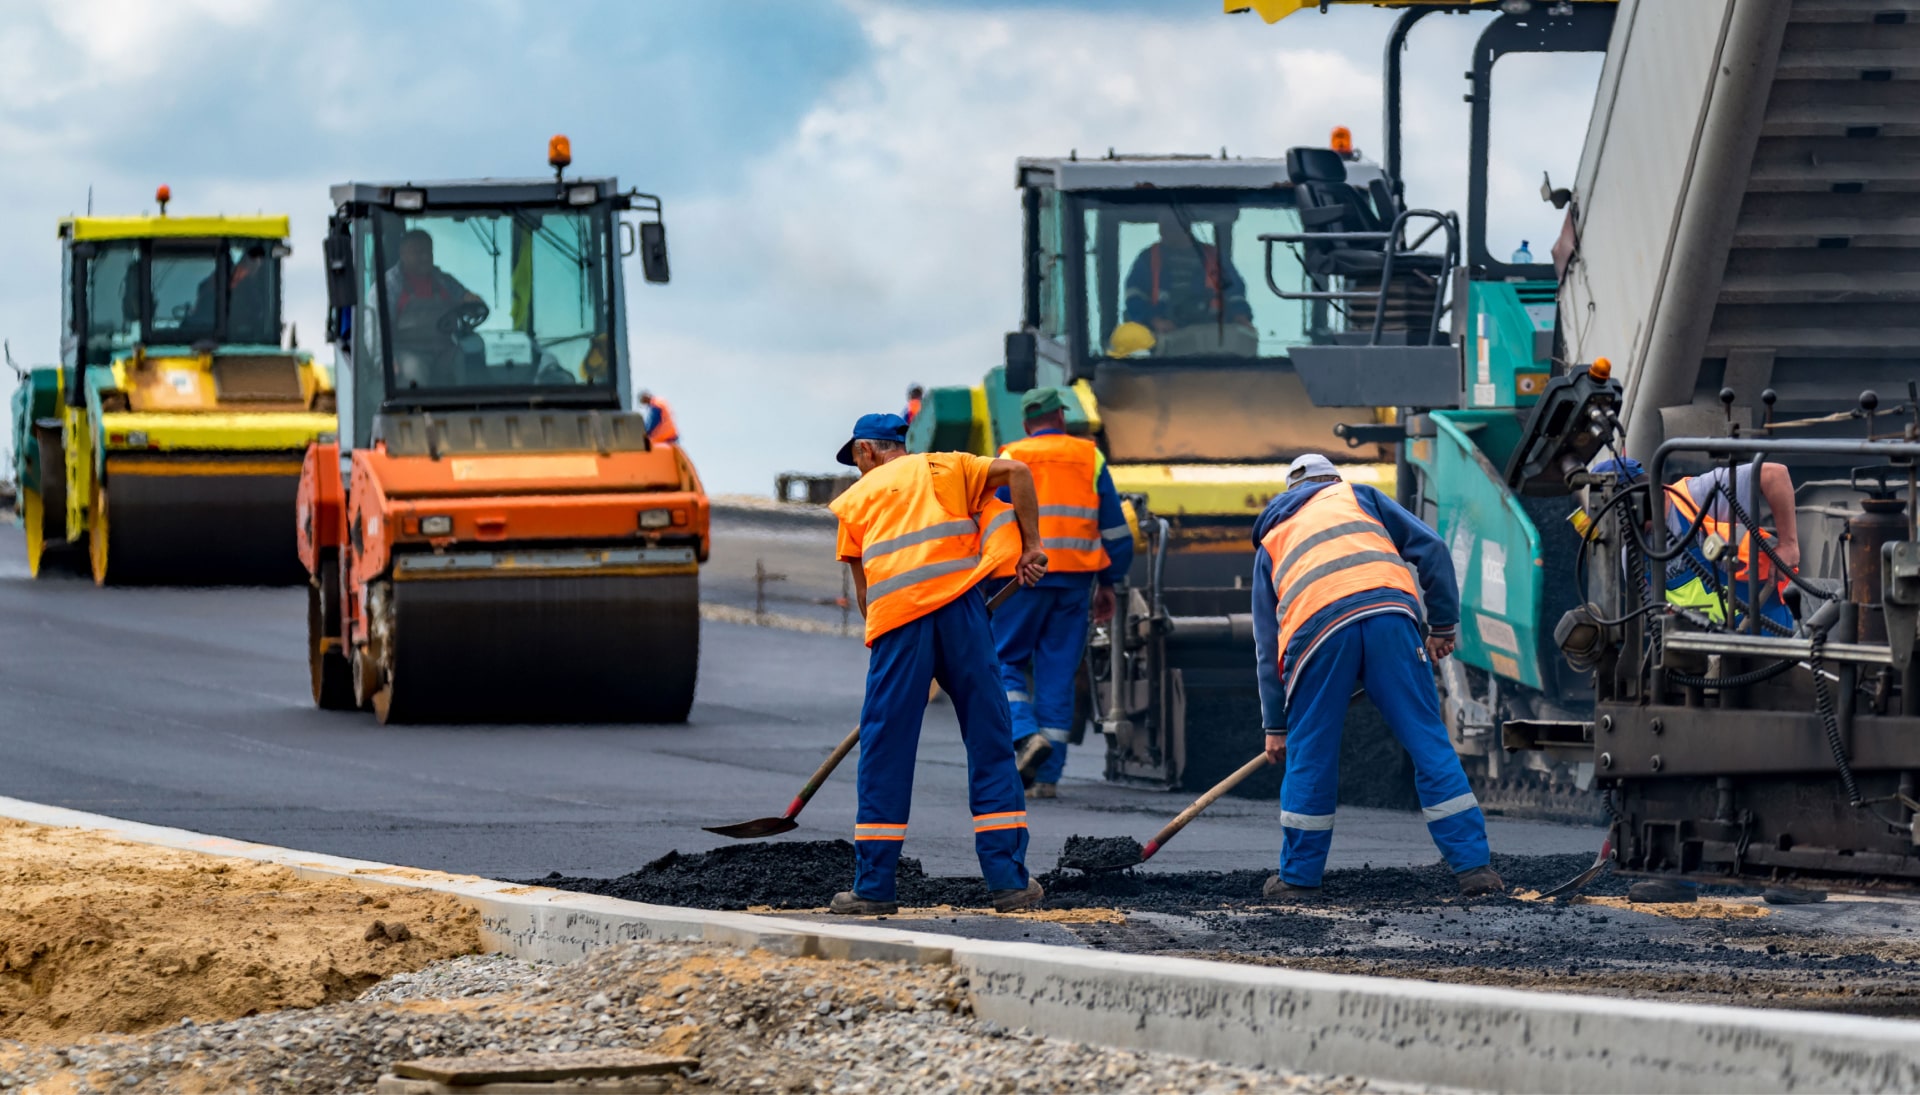 Reliable asphalt construction services in Sarasota, FL for various projects.